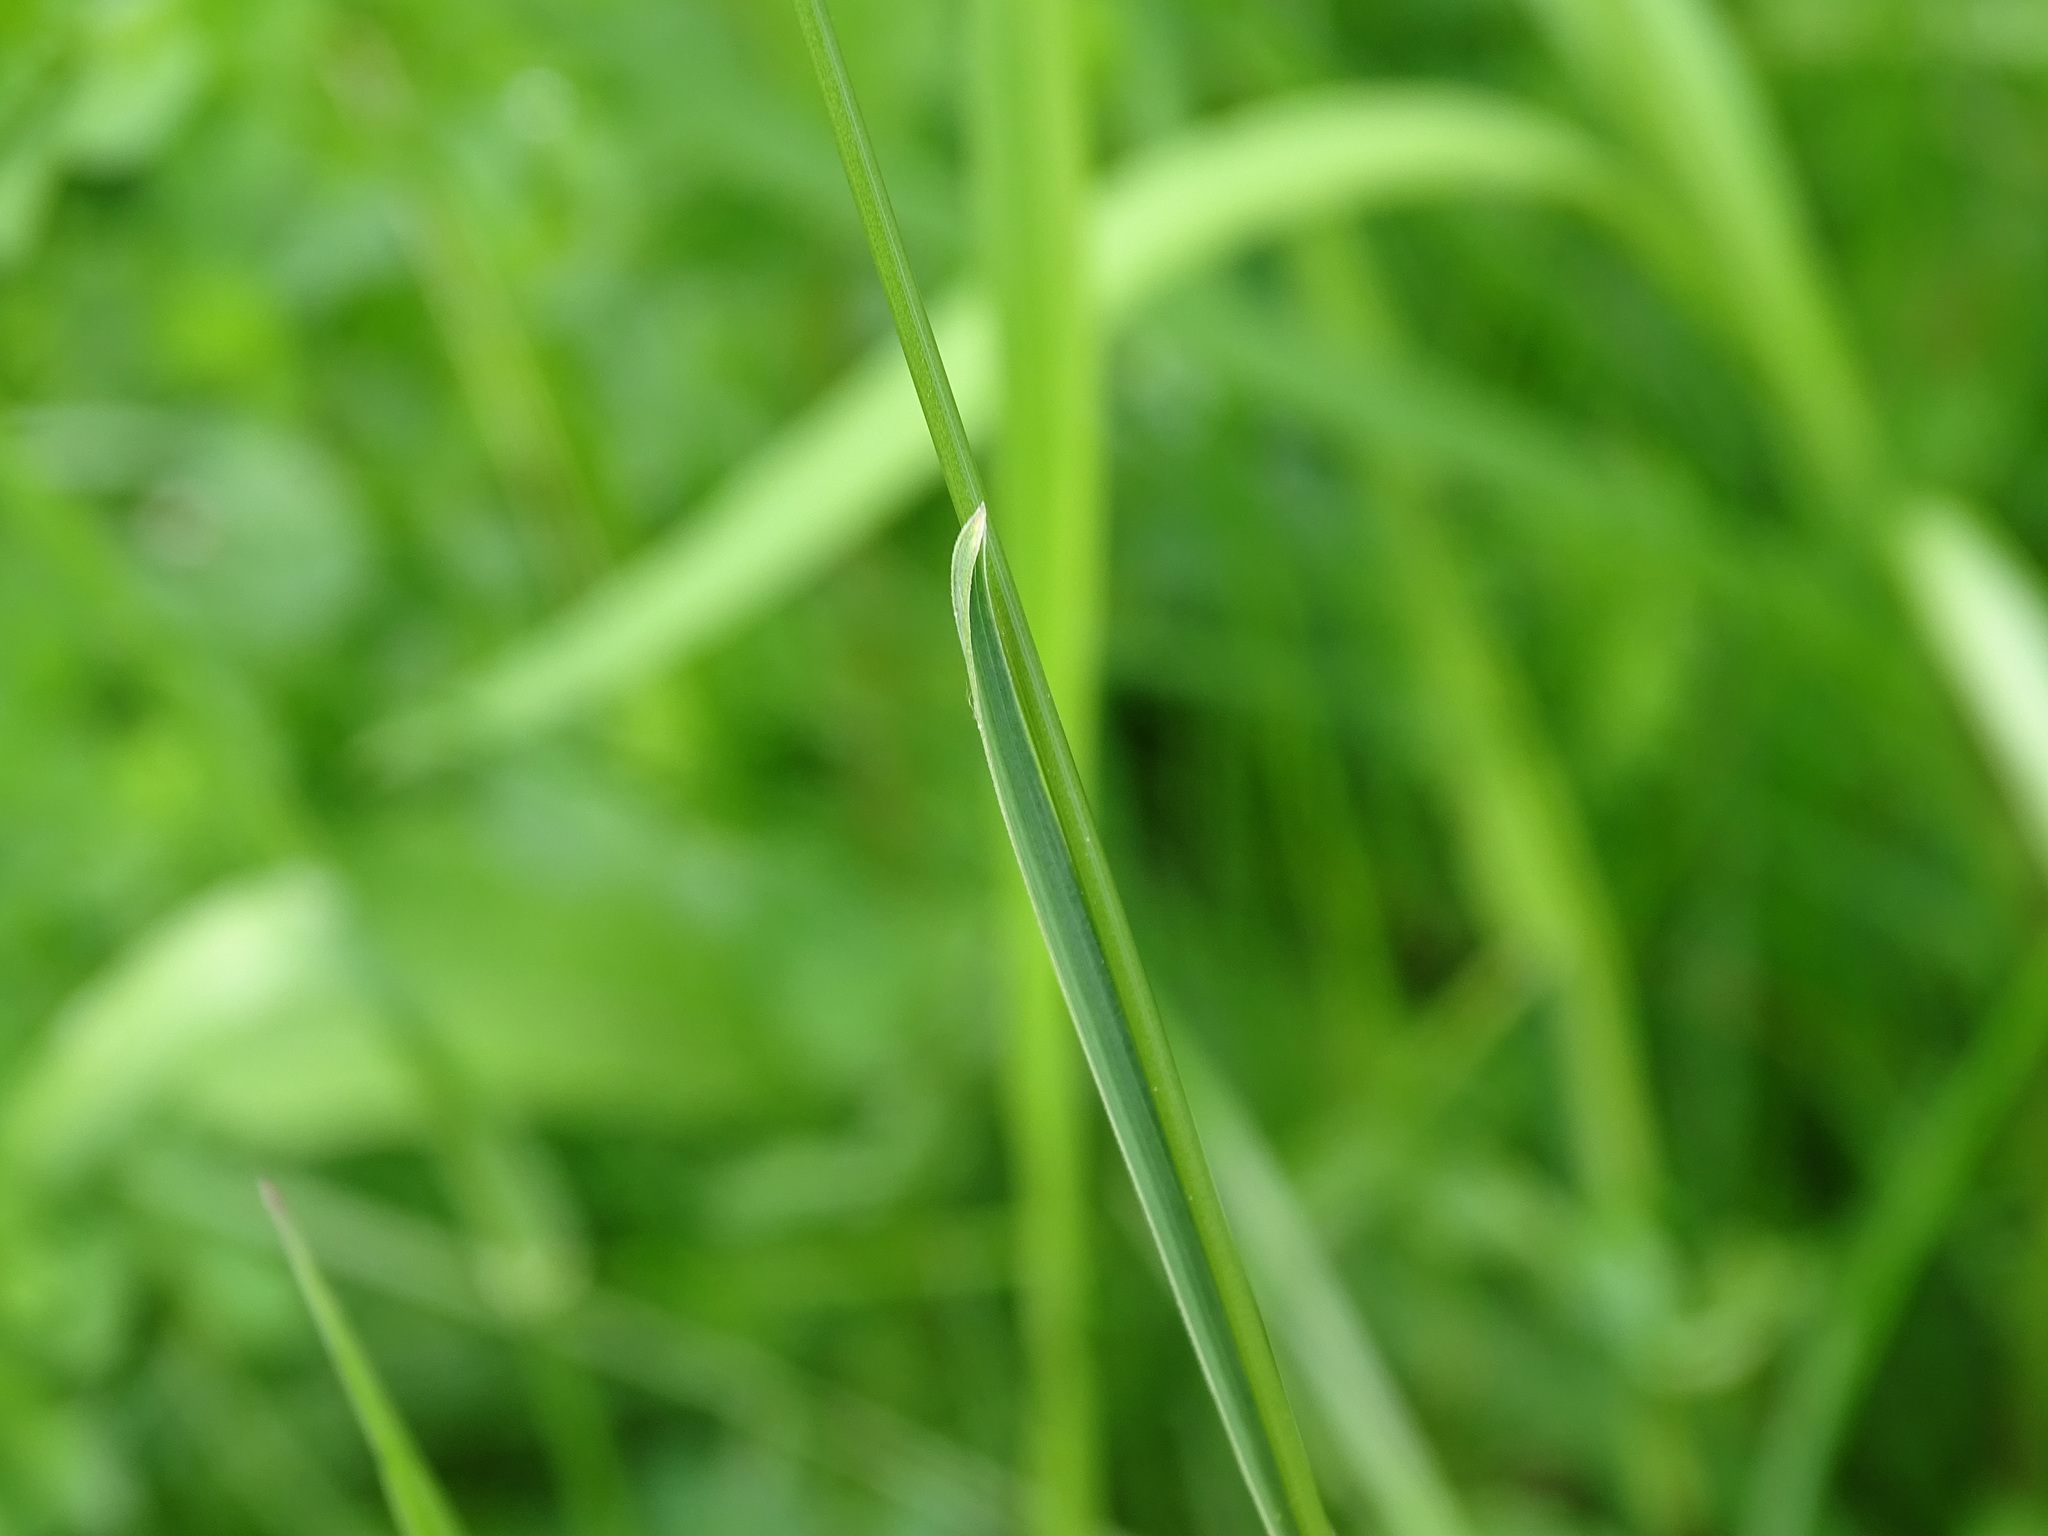 A few blades of Kentucky bluegrass, in focus and surrounded by out of focus blades of Kentucky bluegrass in the background